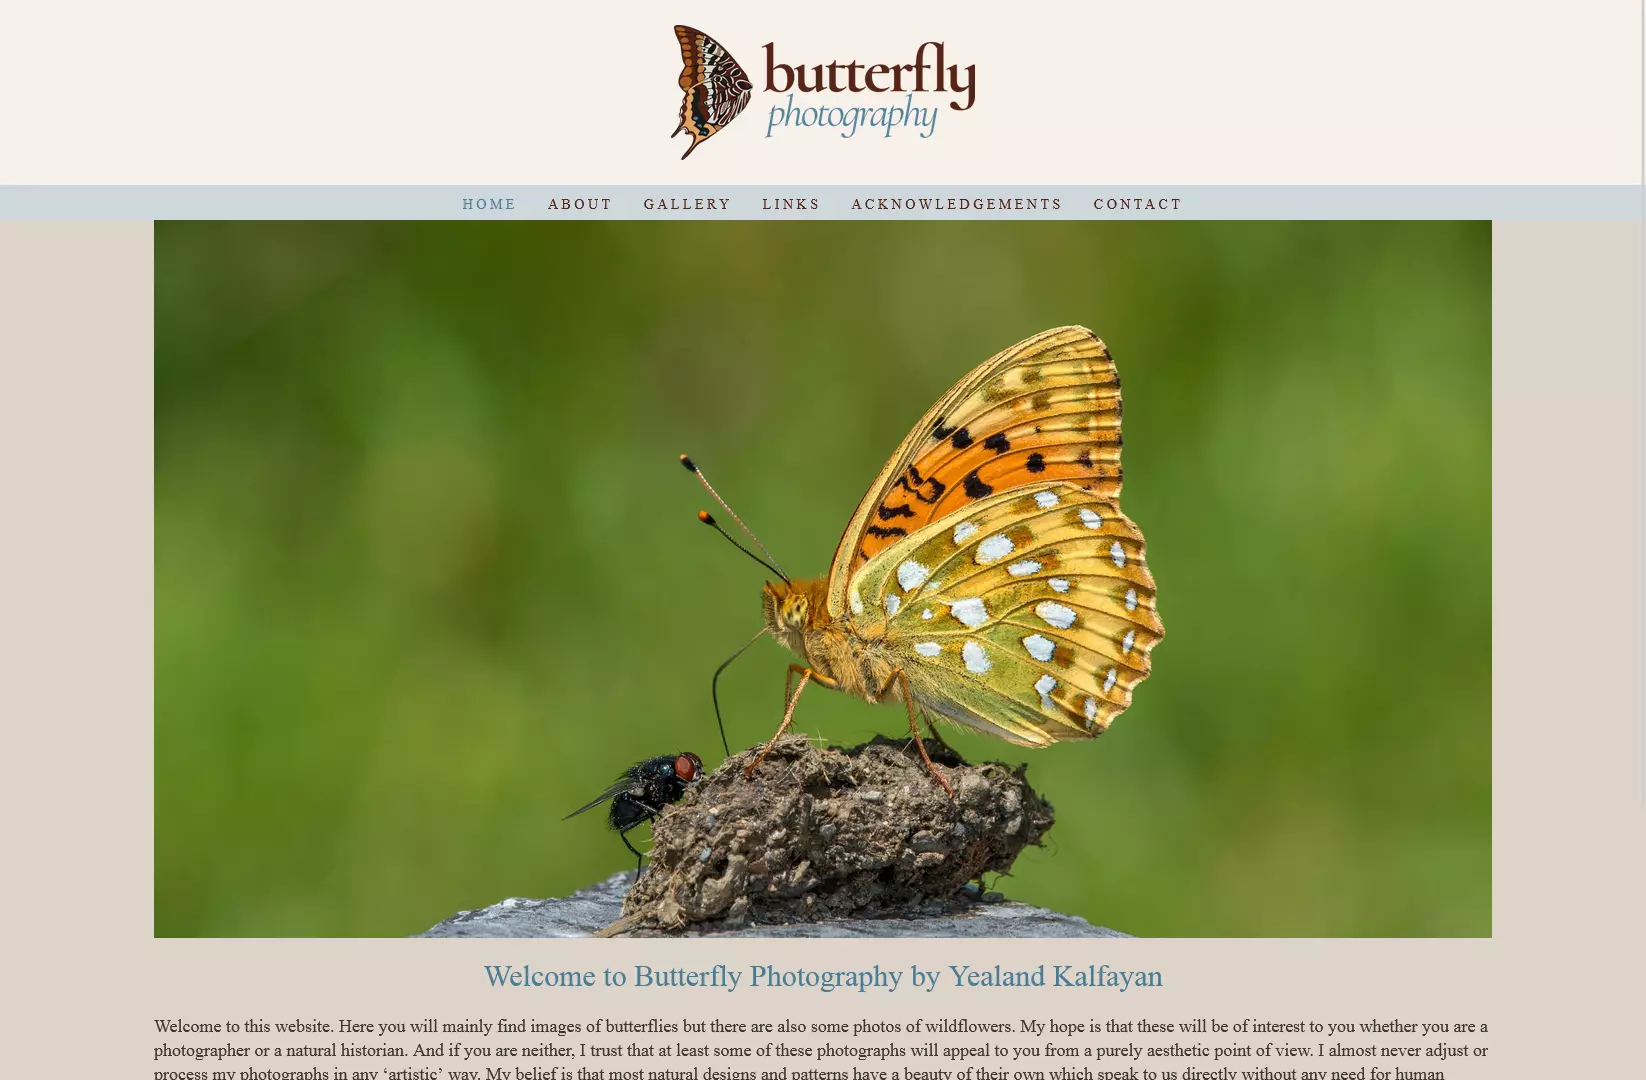 Screenshot of Yealand Kalfayans Butterfly Photography website home page